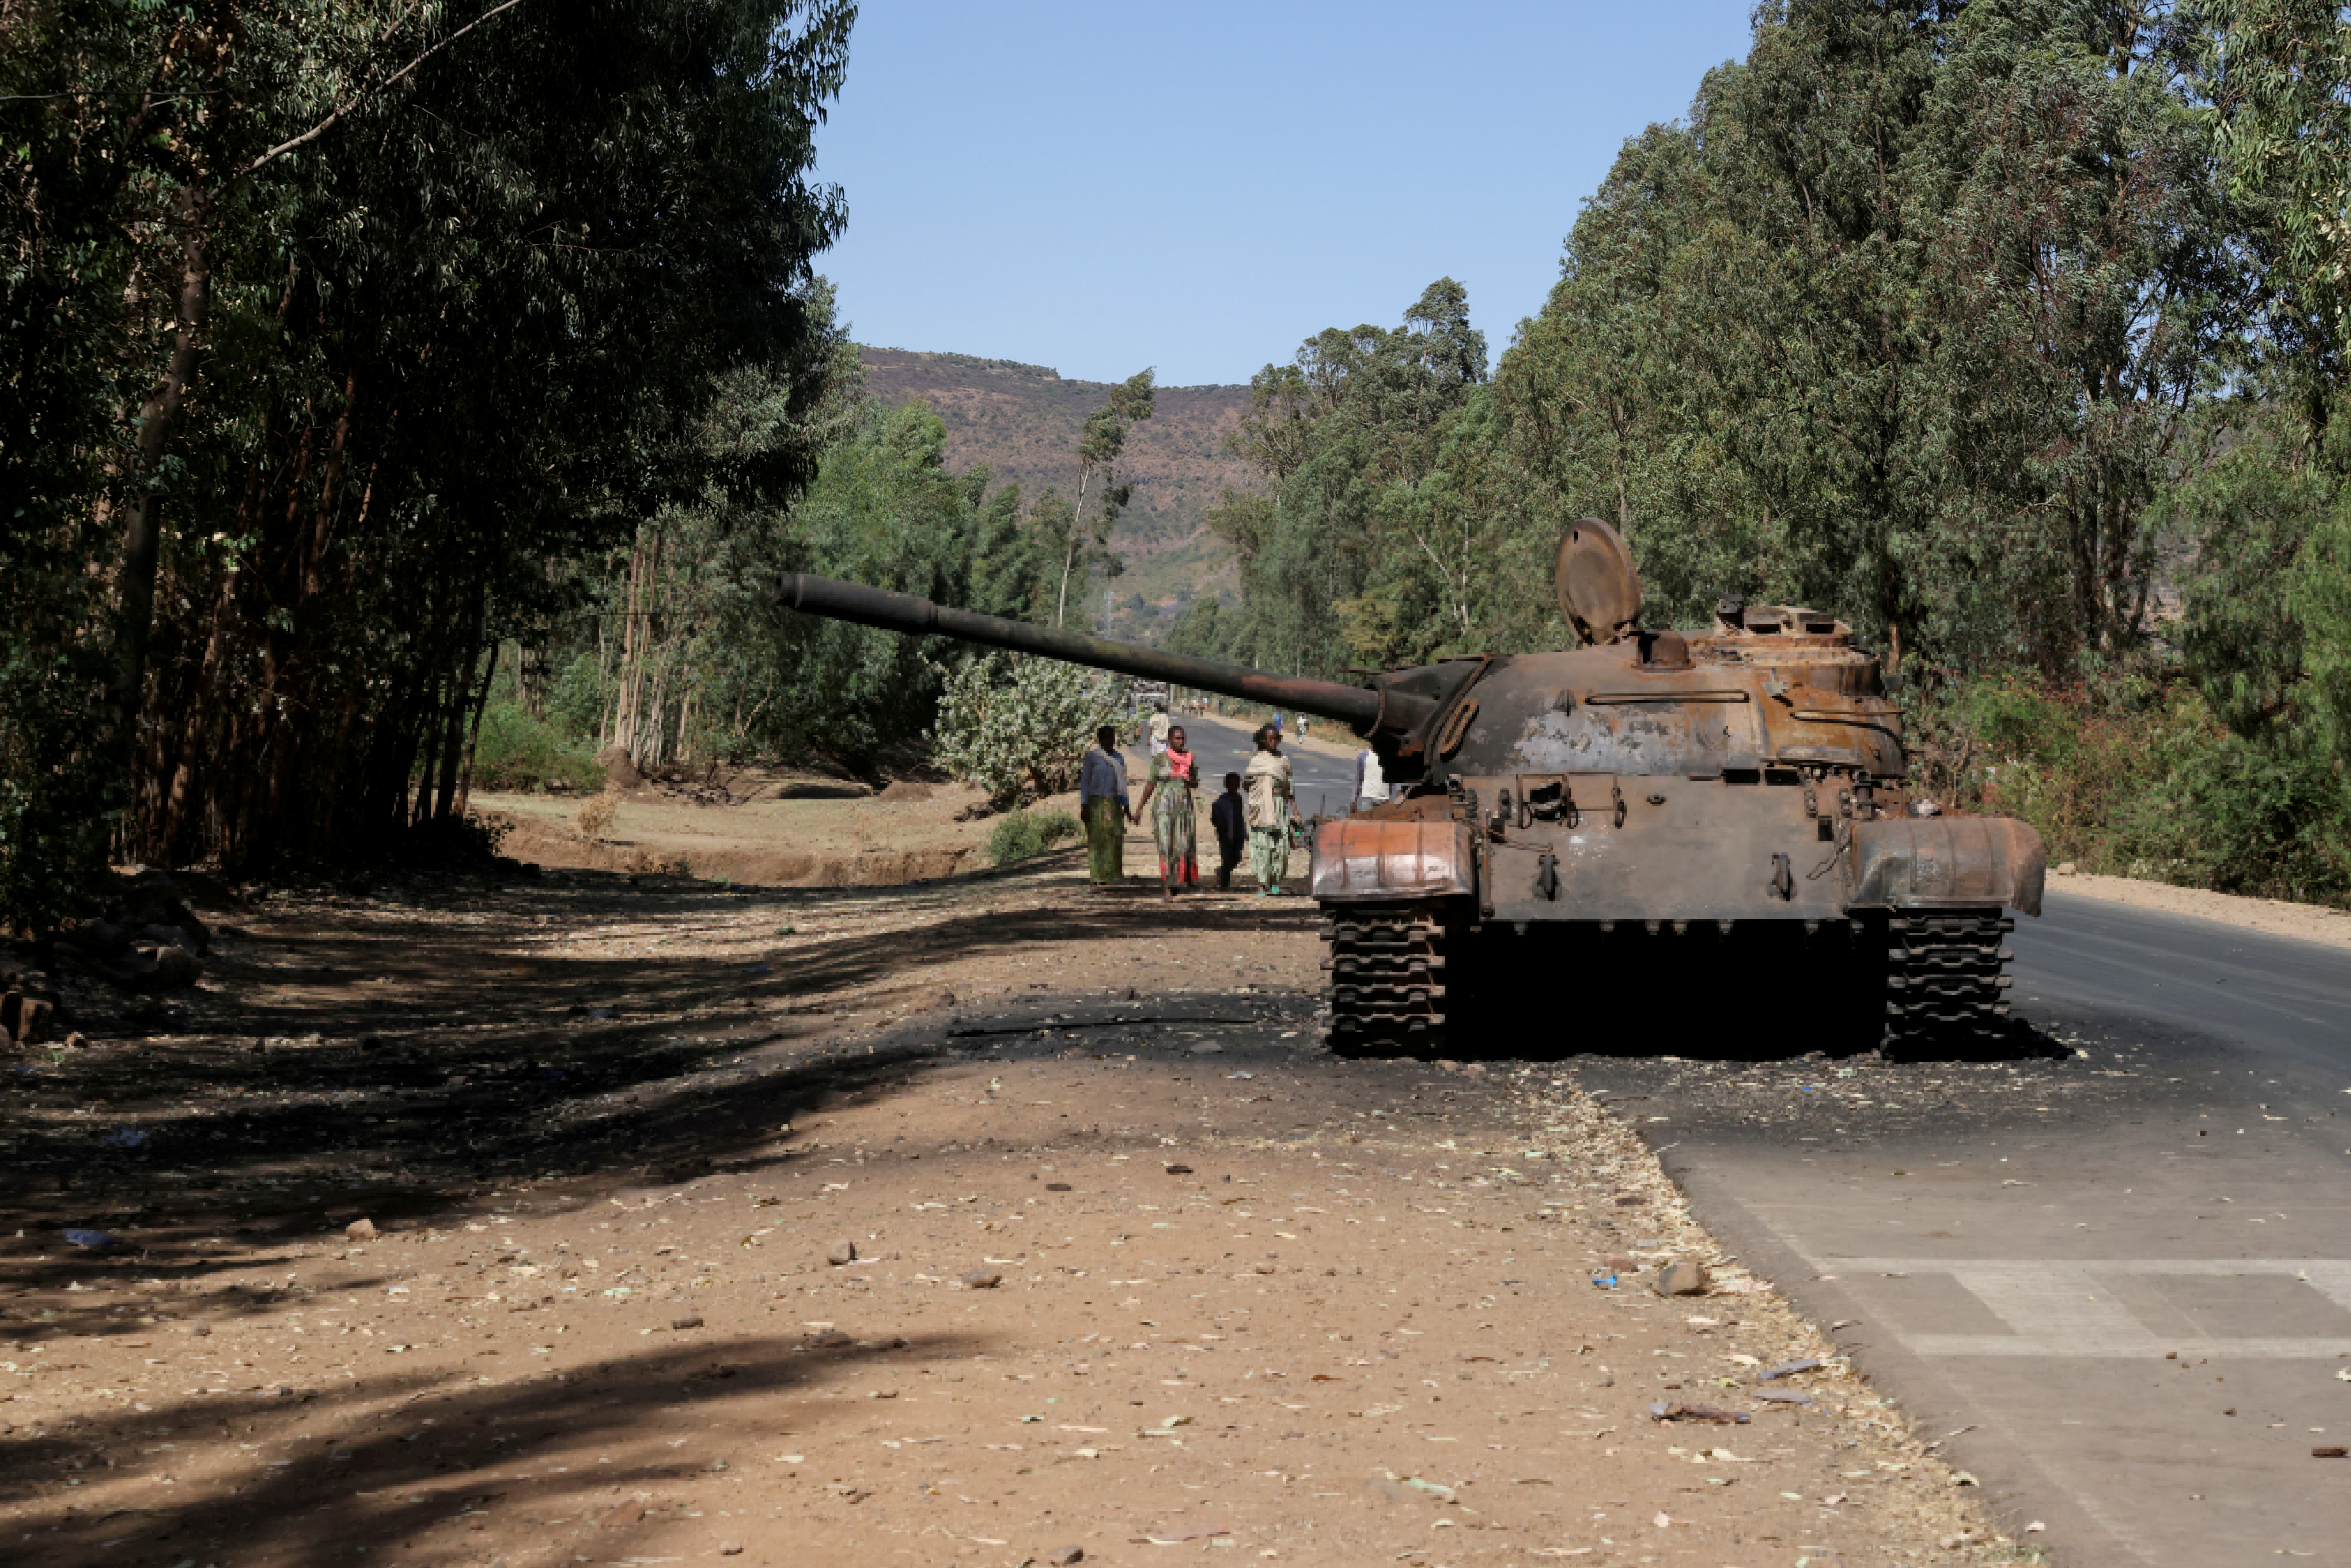 A burned tank stands near the town of Adwa, Tigray region, Ethiopia.